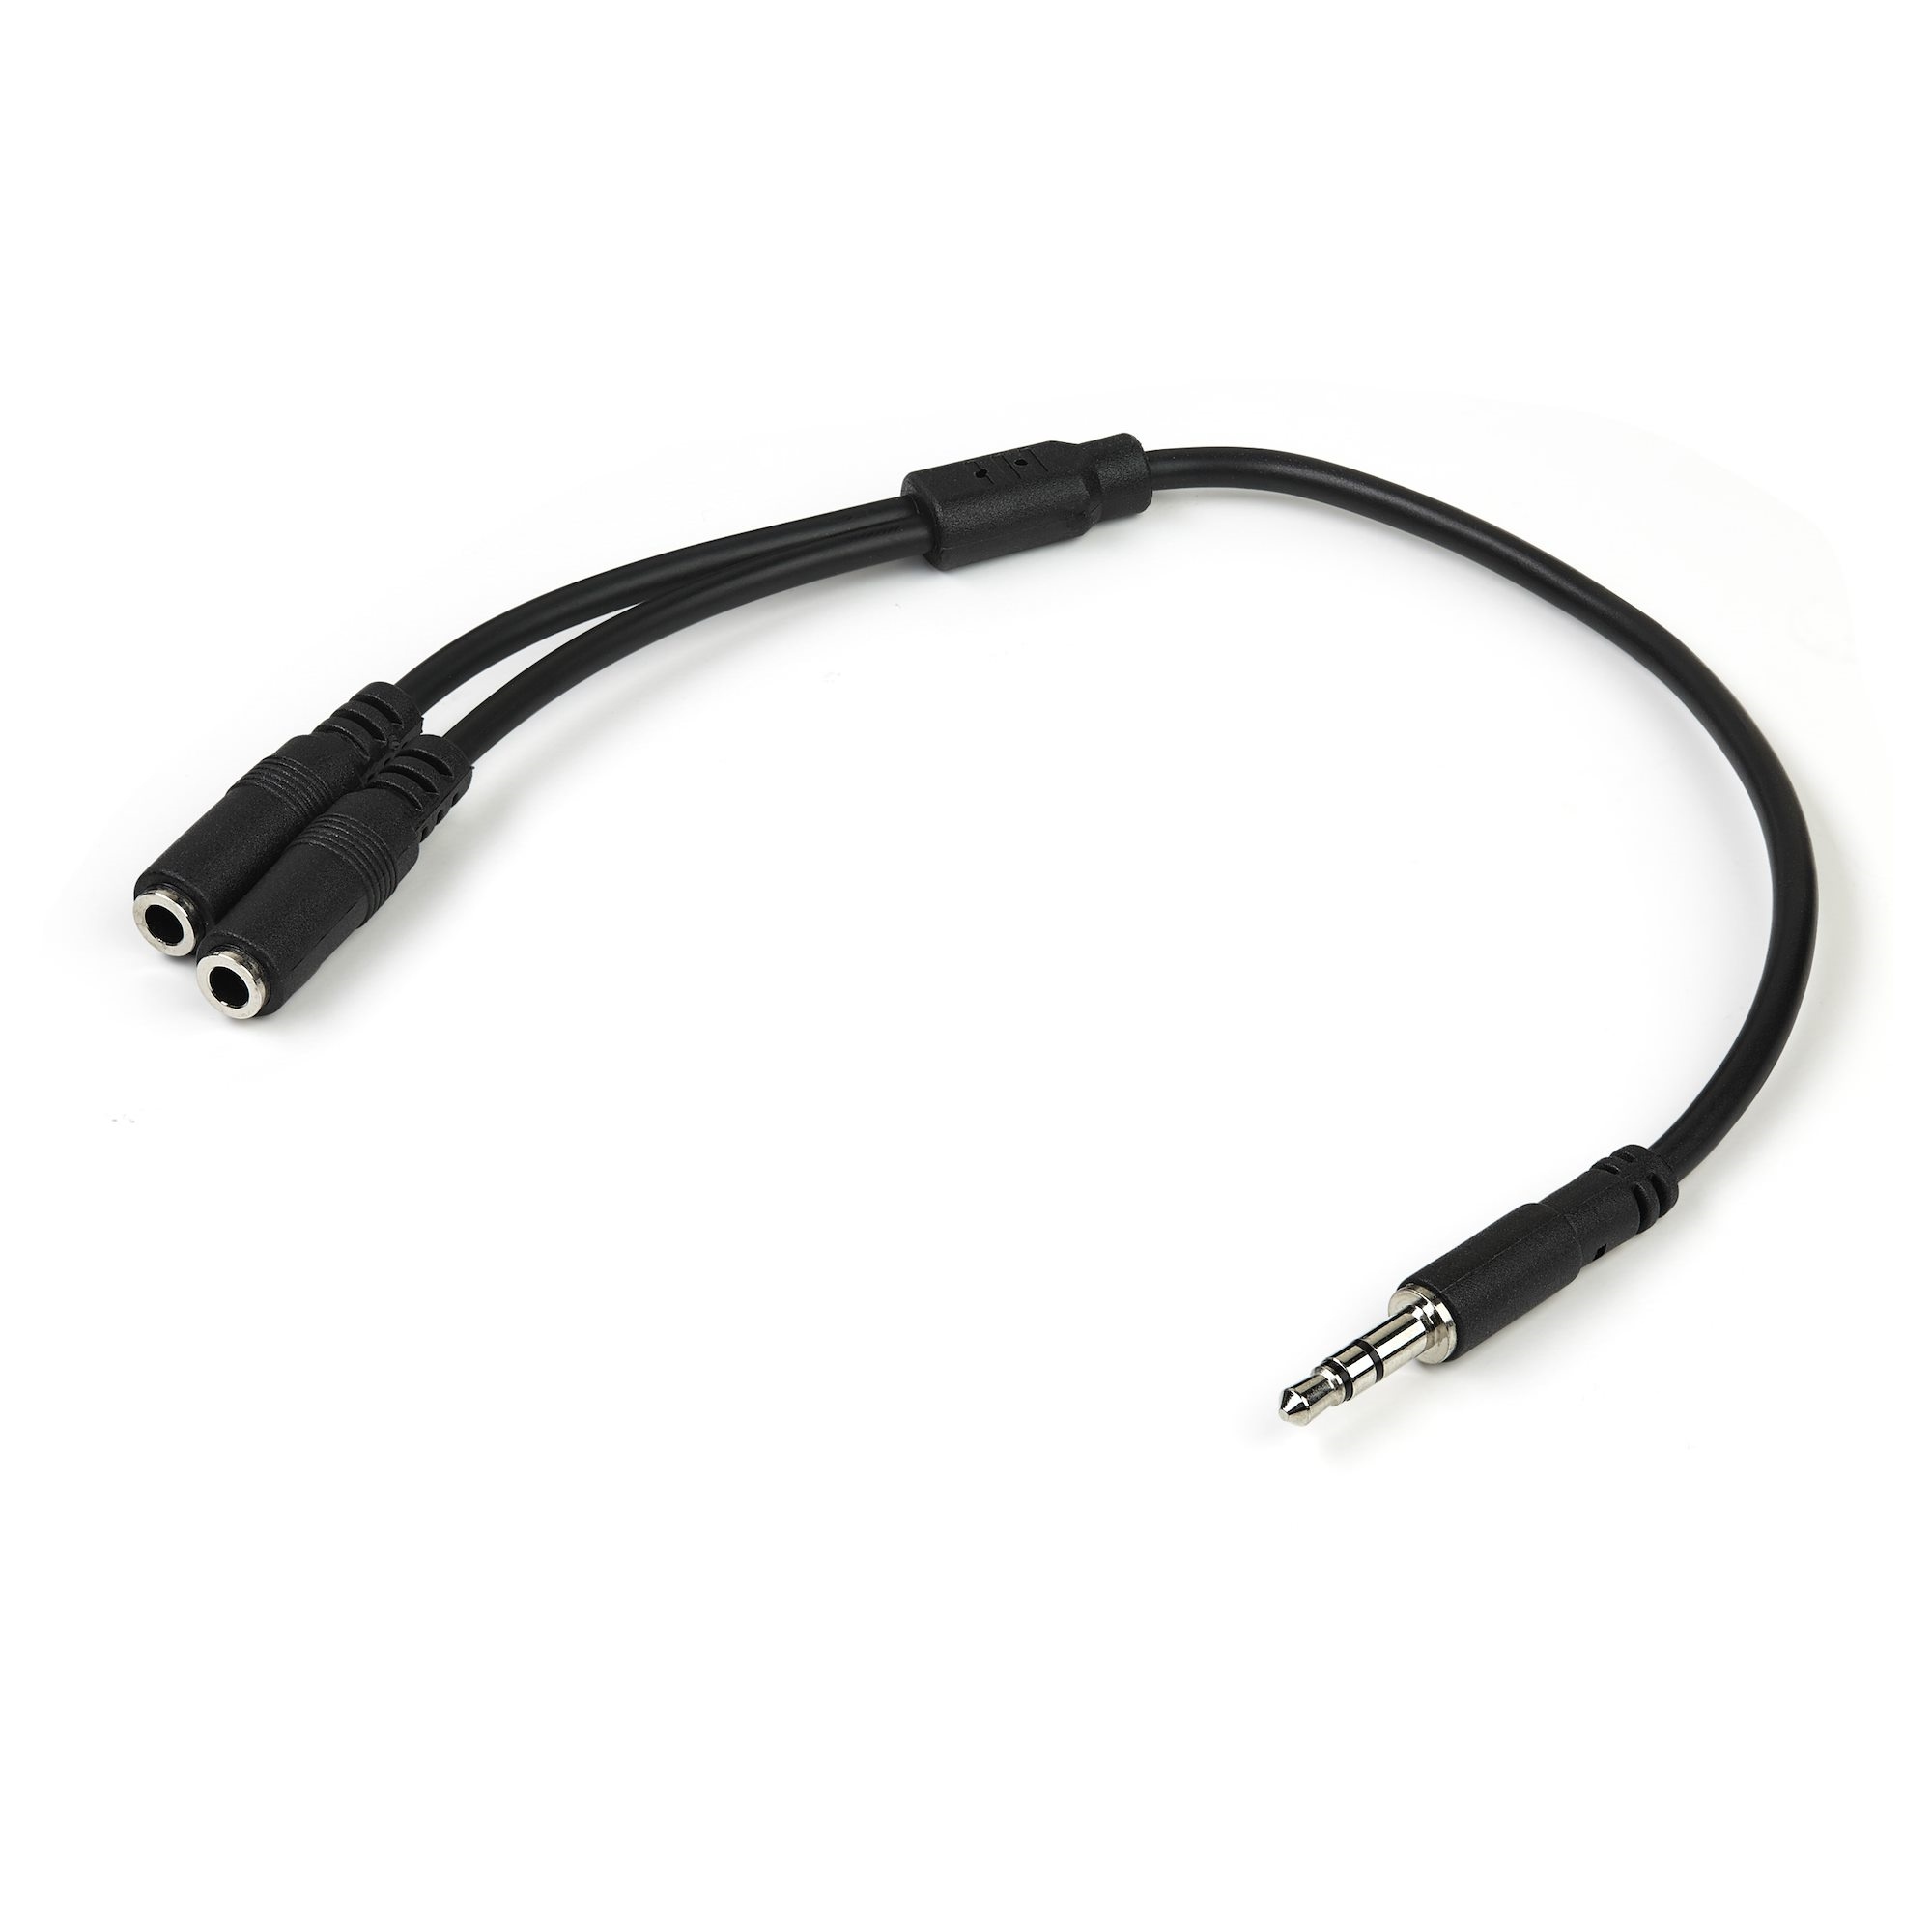 StarTech 3.5mm TRS Male to Dual 3.5mm TRS Female Stereo Splitter Cable (Black)